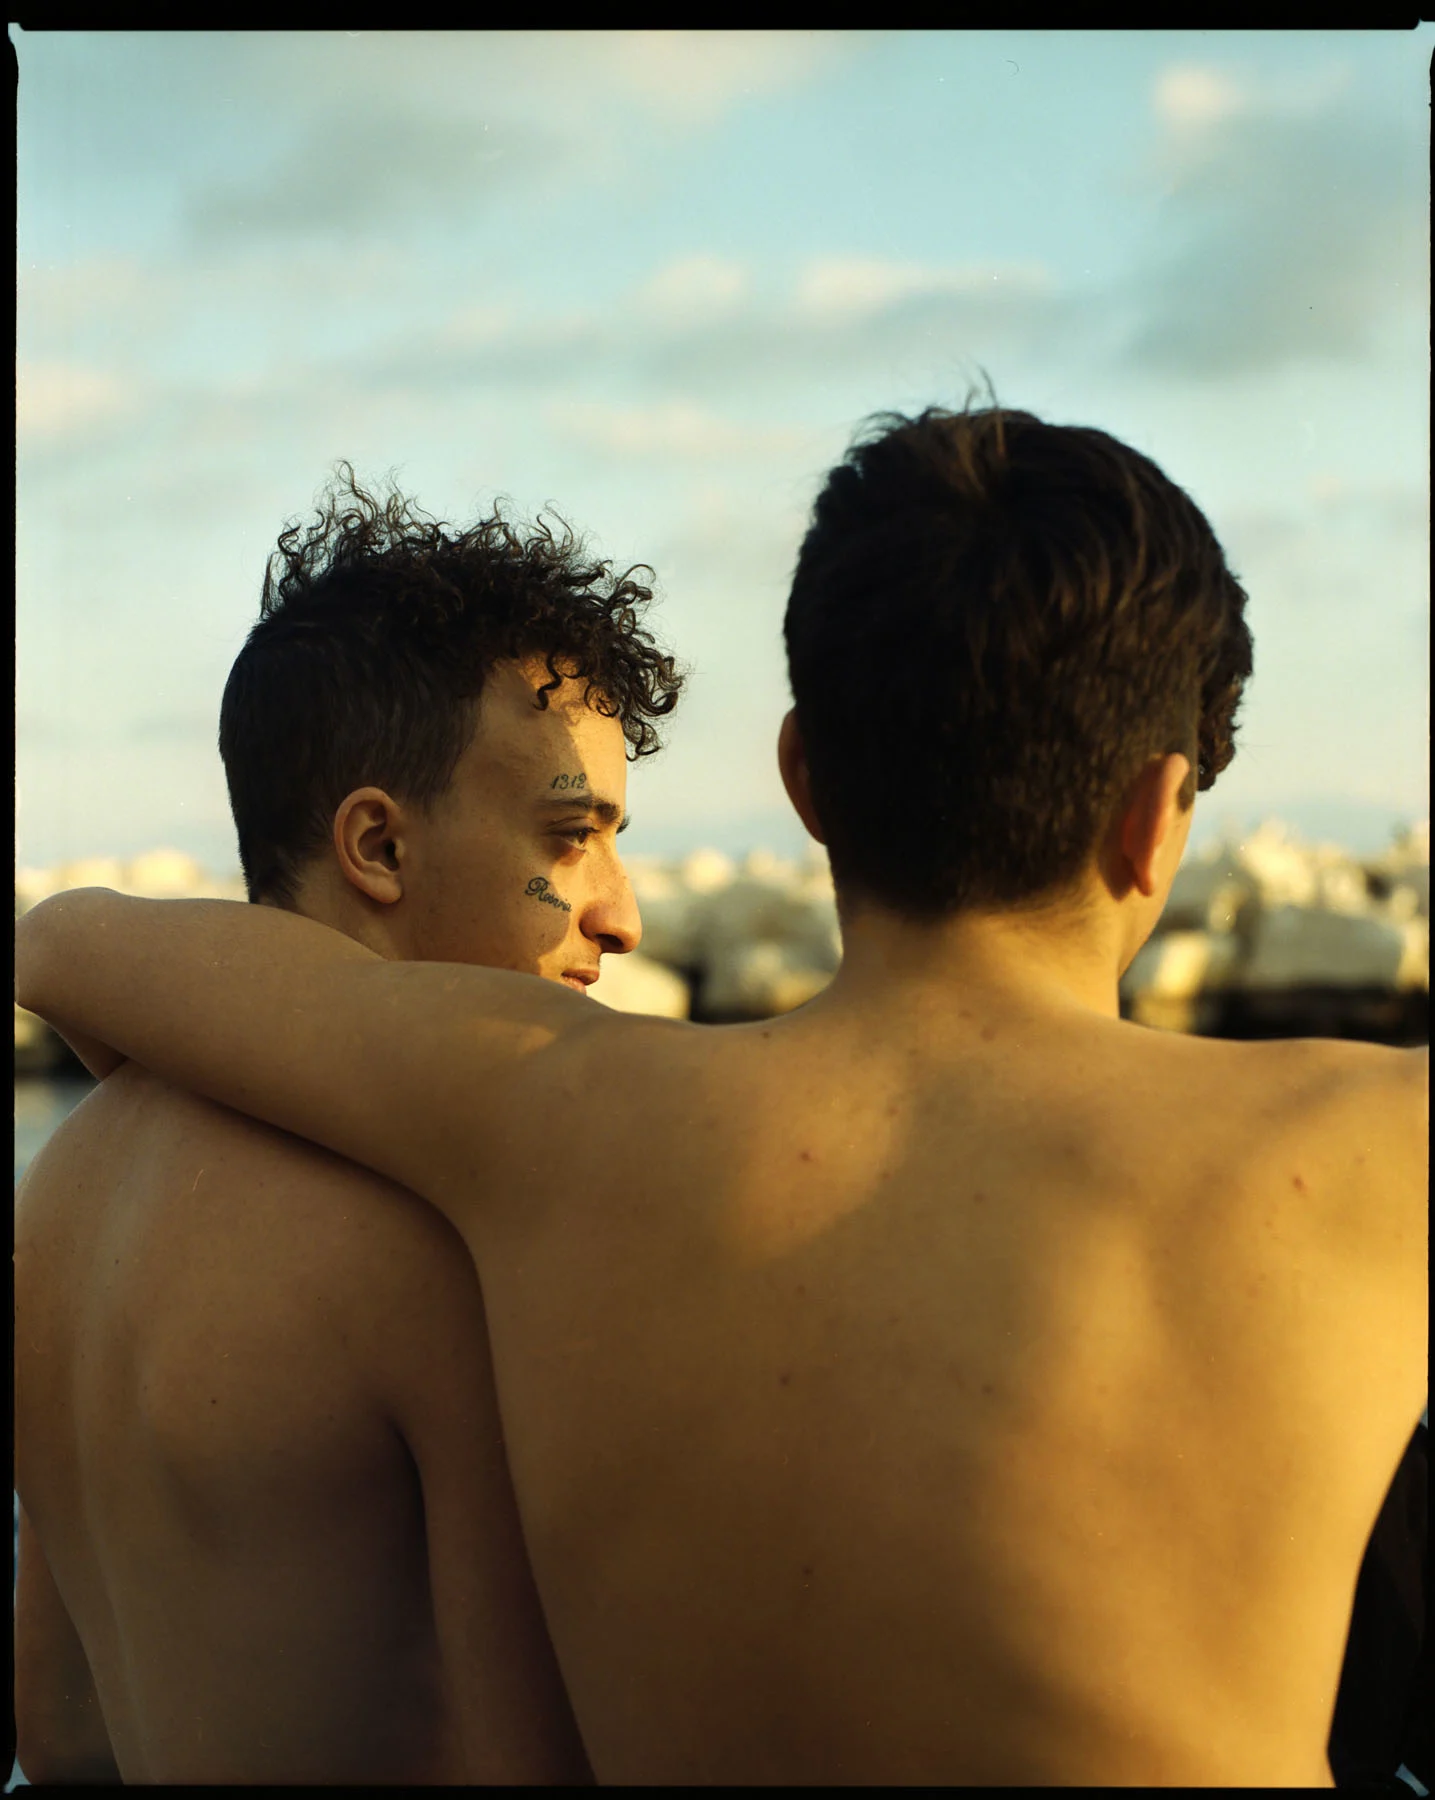 A photo of two teenage Neapolitan boys embracing. The photo is taken from behind them, the sun shining on the backs.